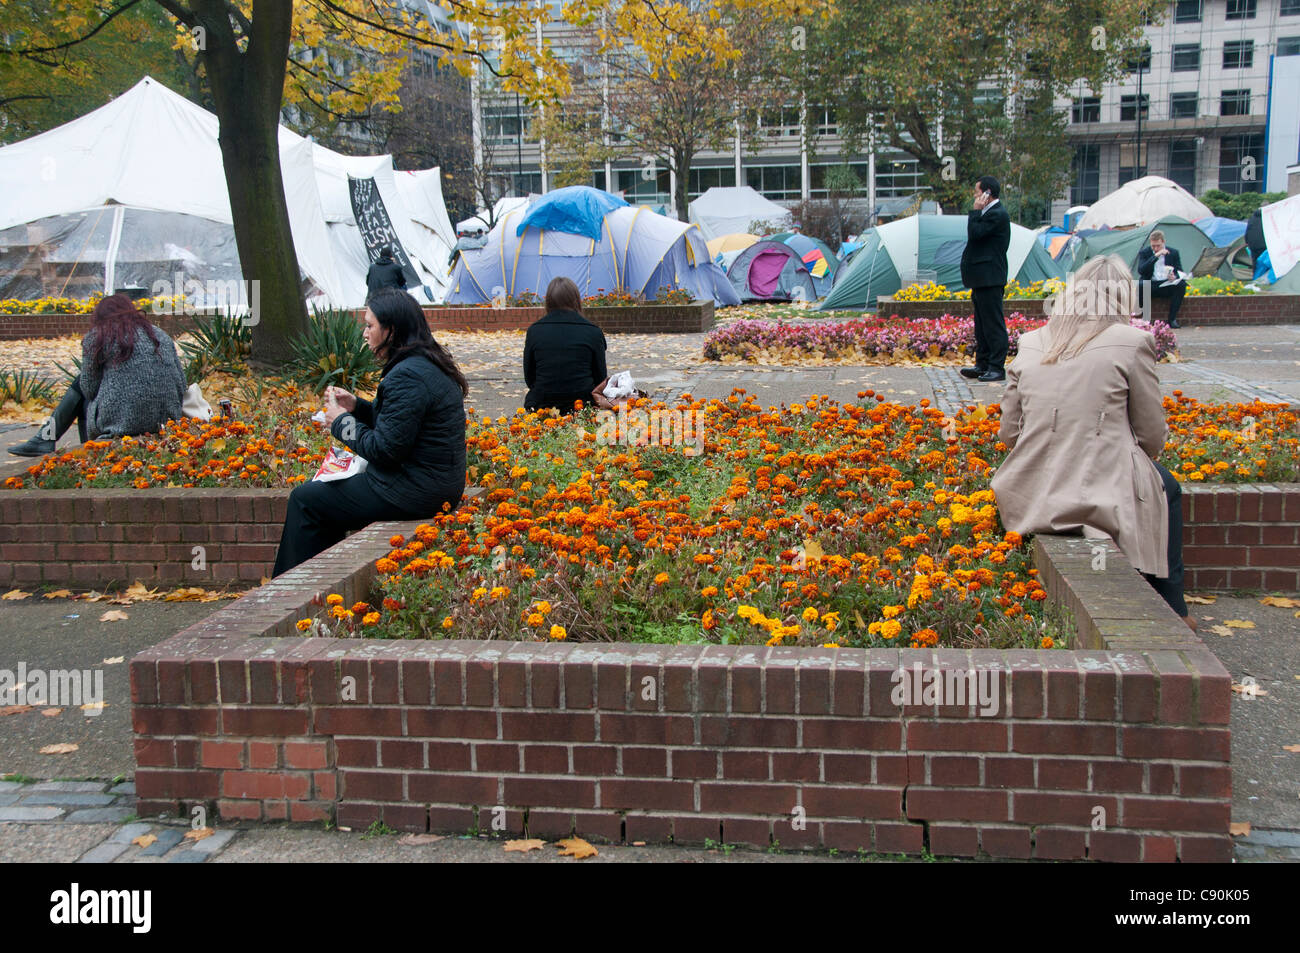 Occupy London Camp November 3rd 2011 Finsbury Square. City workers having lunch with tents in background Stock Photo